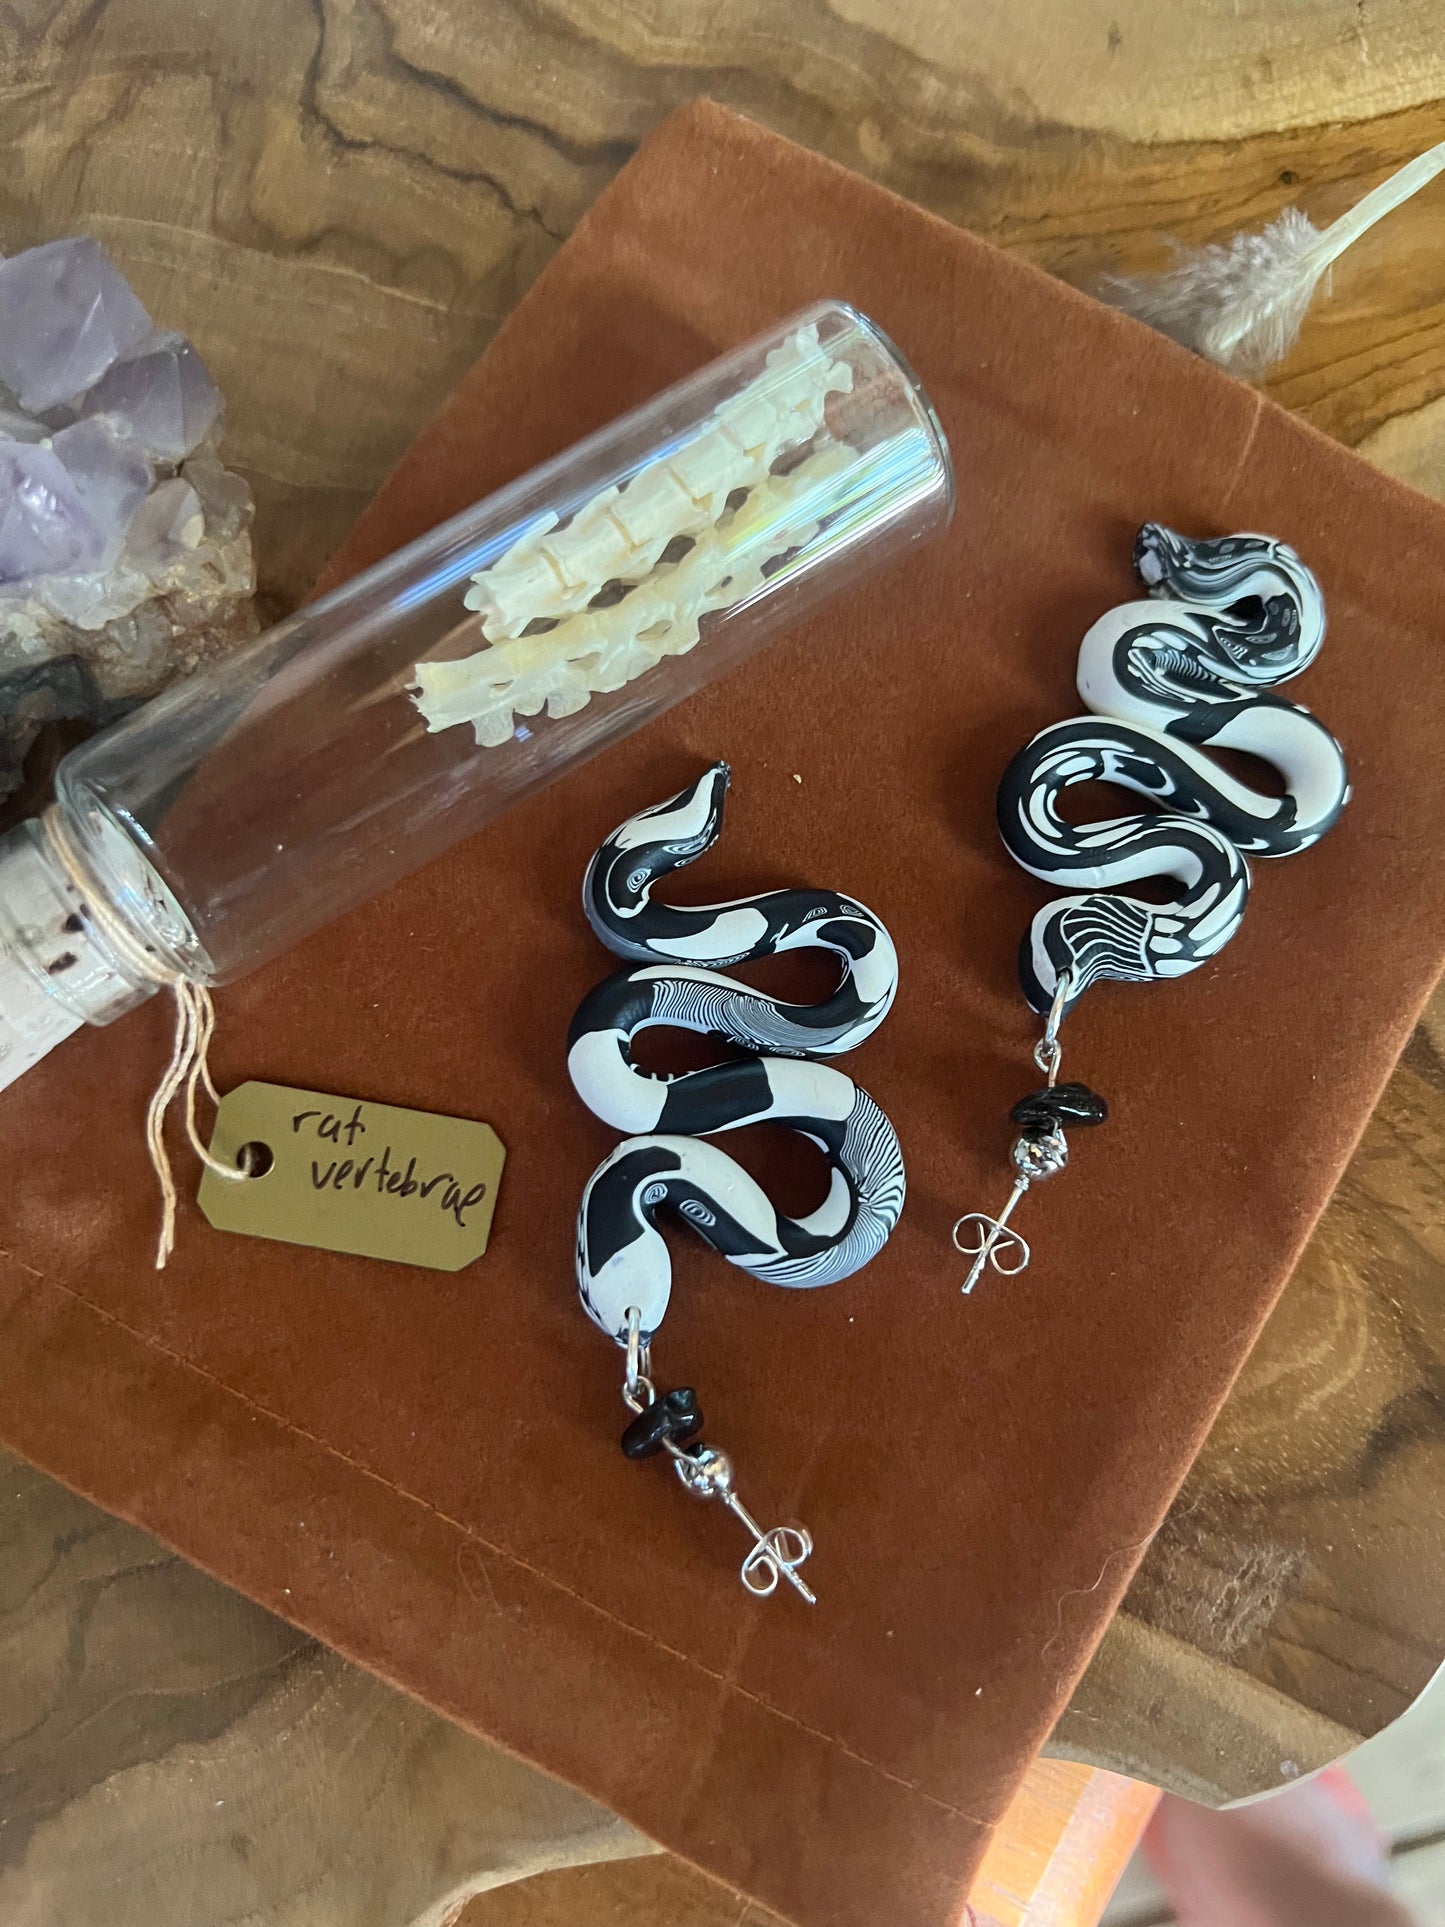 Embrace the symbolism of transformation and renewal with our snake earrings. These earrings embody the serpent's power, representing cycles of shedding old skin and embracing new beginnings. Perfect for those seeking to embrace change and personal growth in their style.